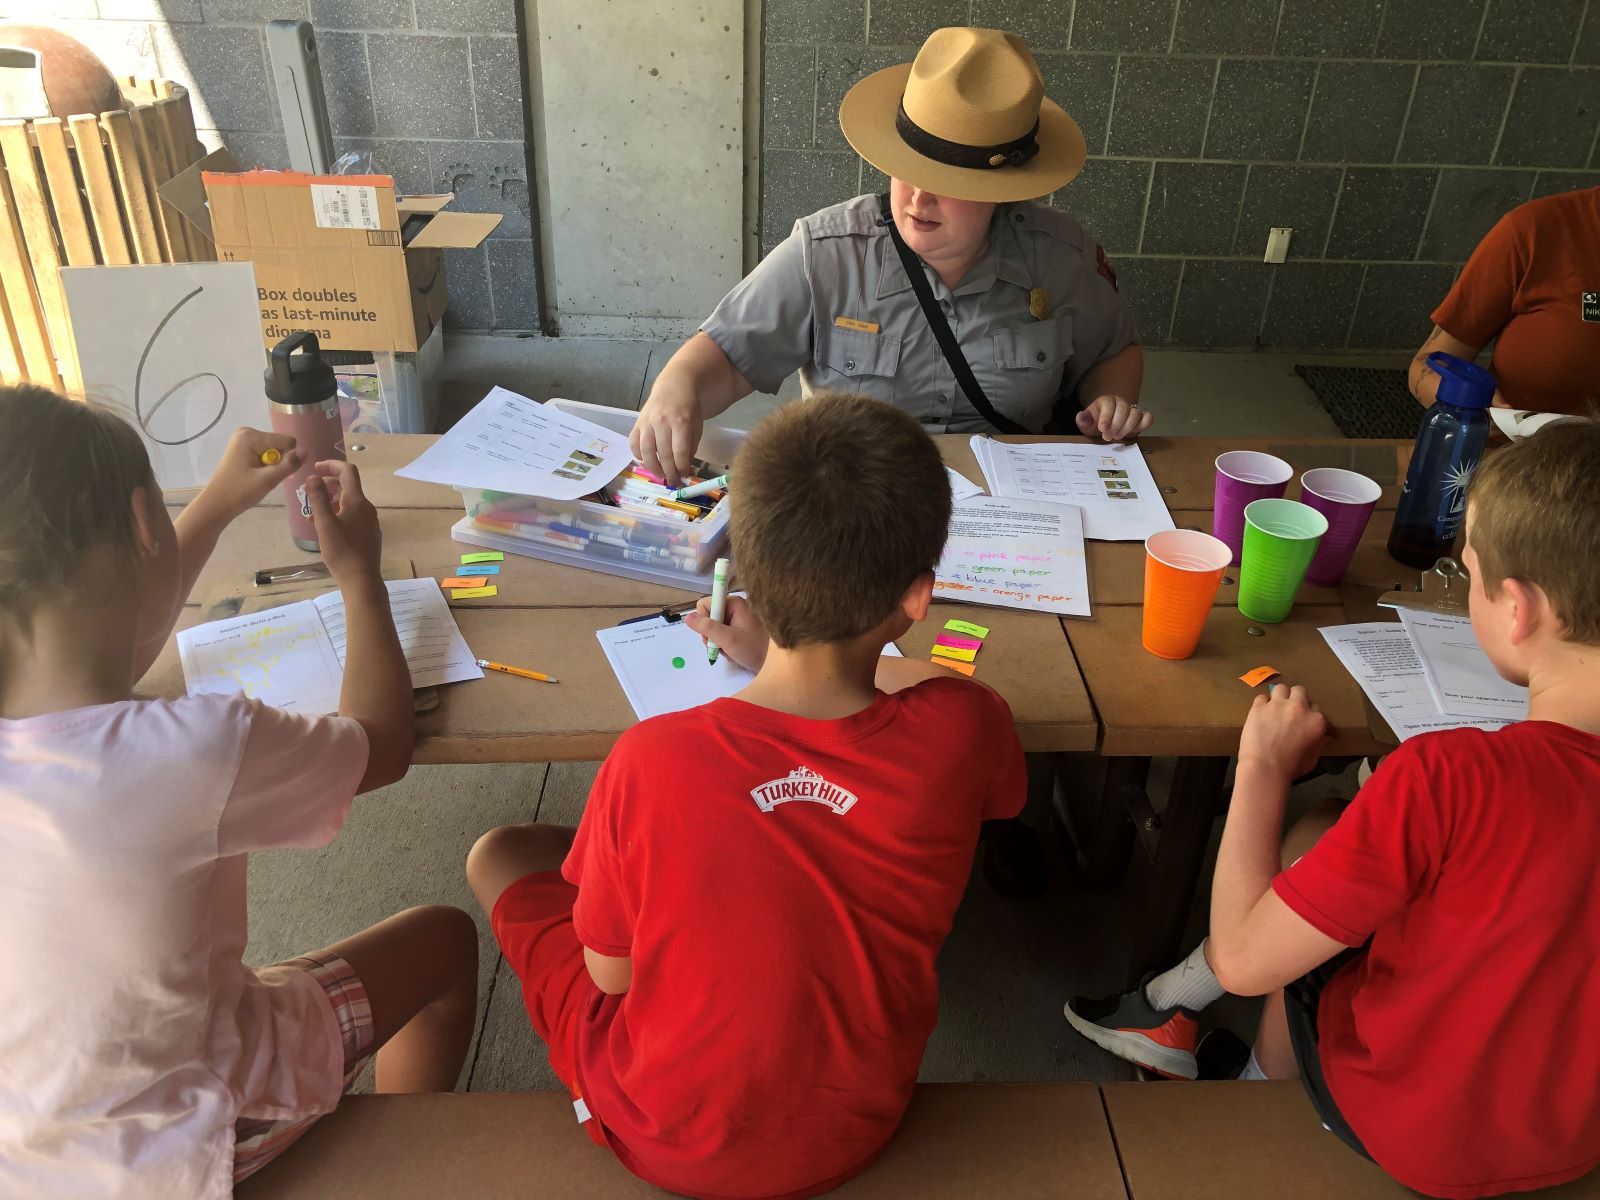 A ranger and students doing a science activity at a picnic table.